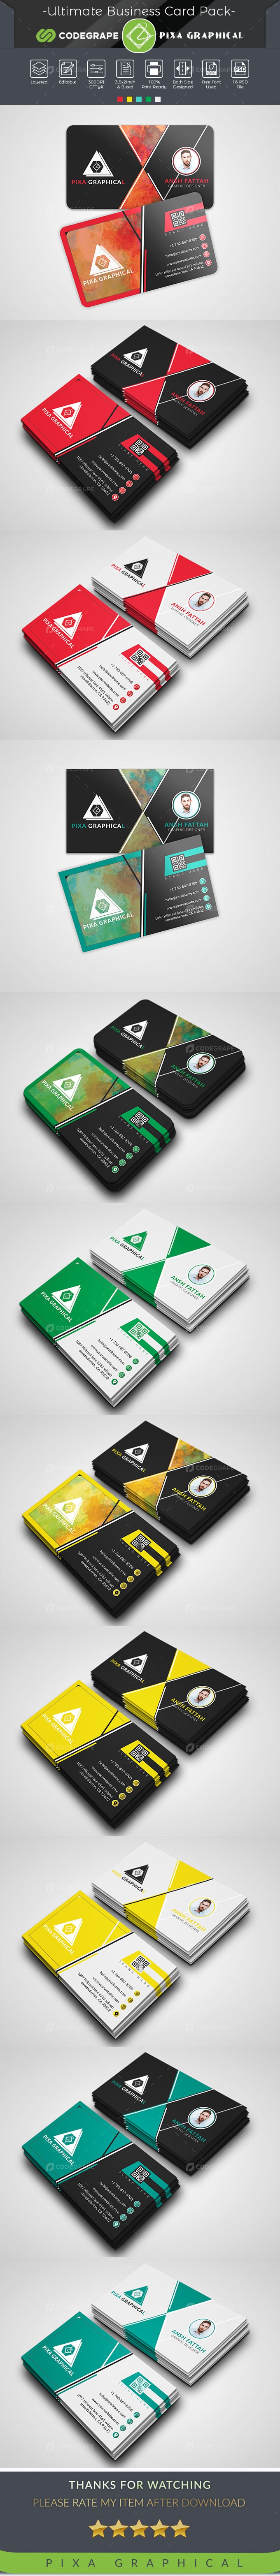 Ultimate Business Card Pack